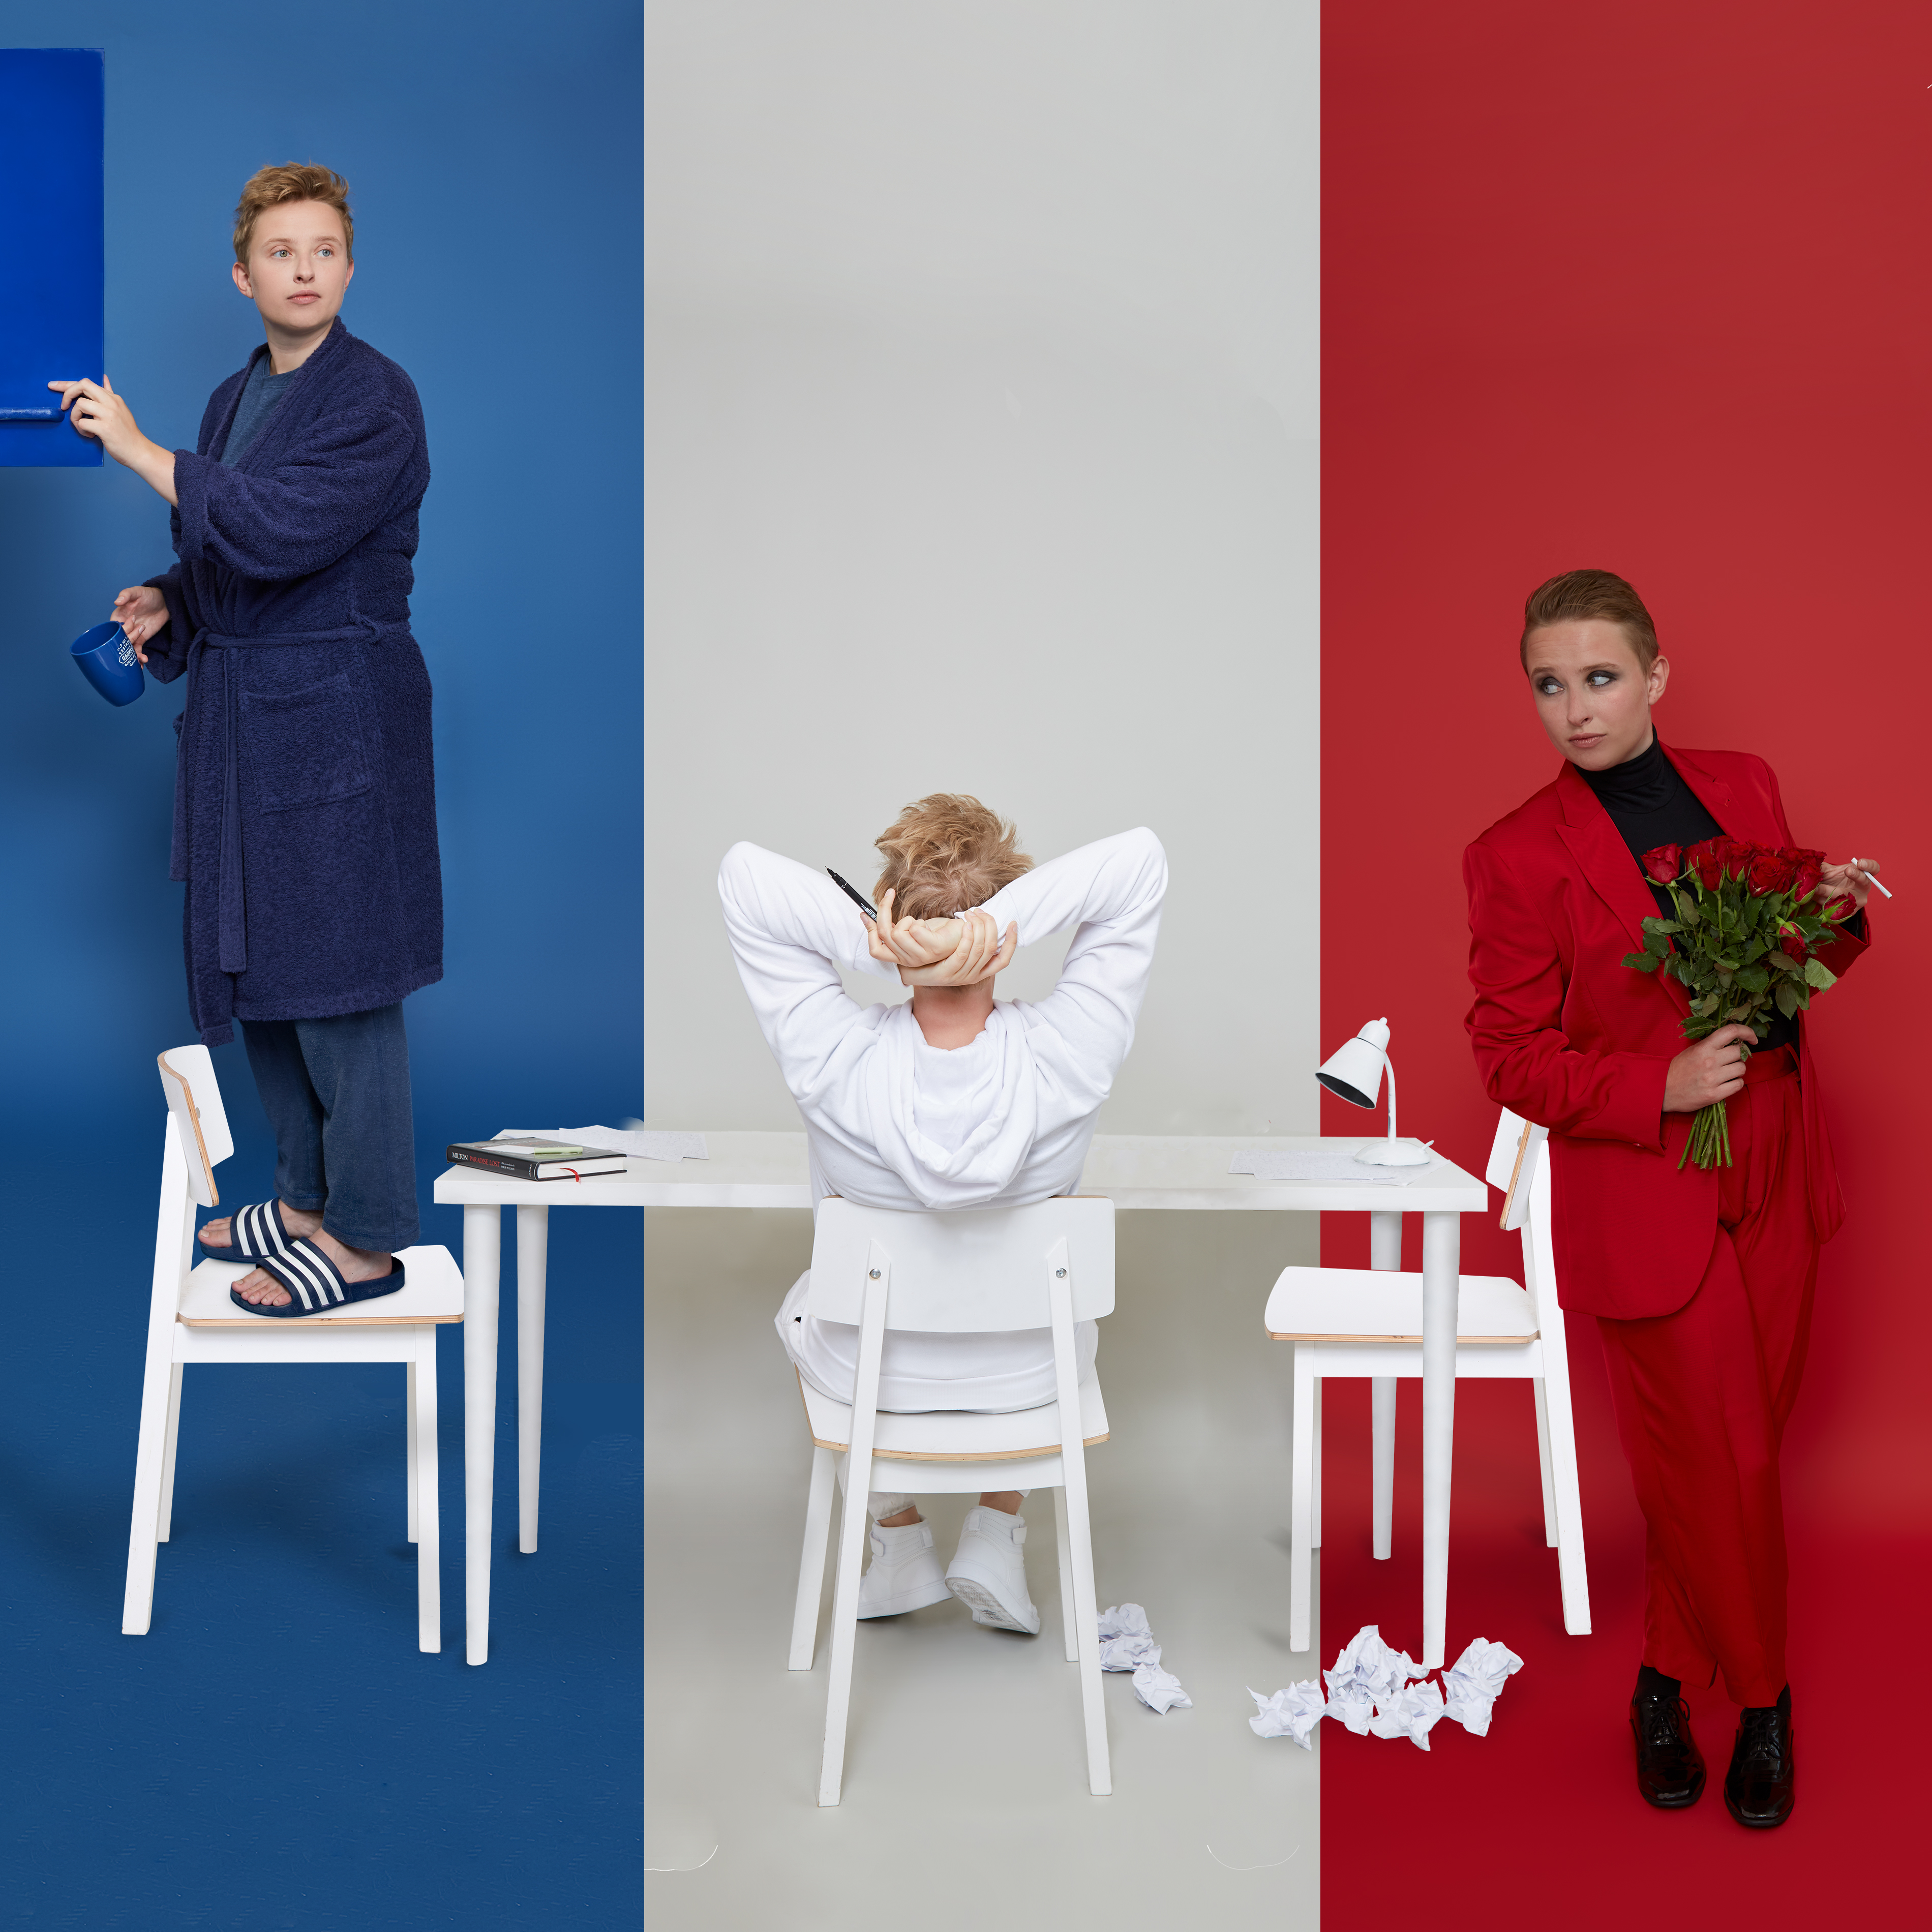 Performer Hannah Maxwell posing infront of a french flag